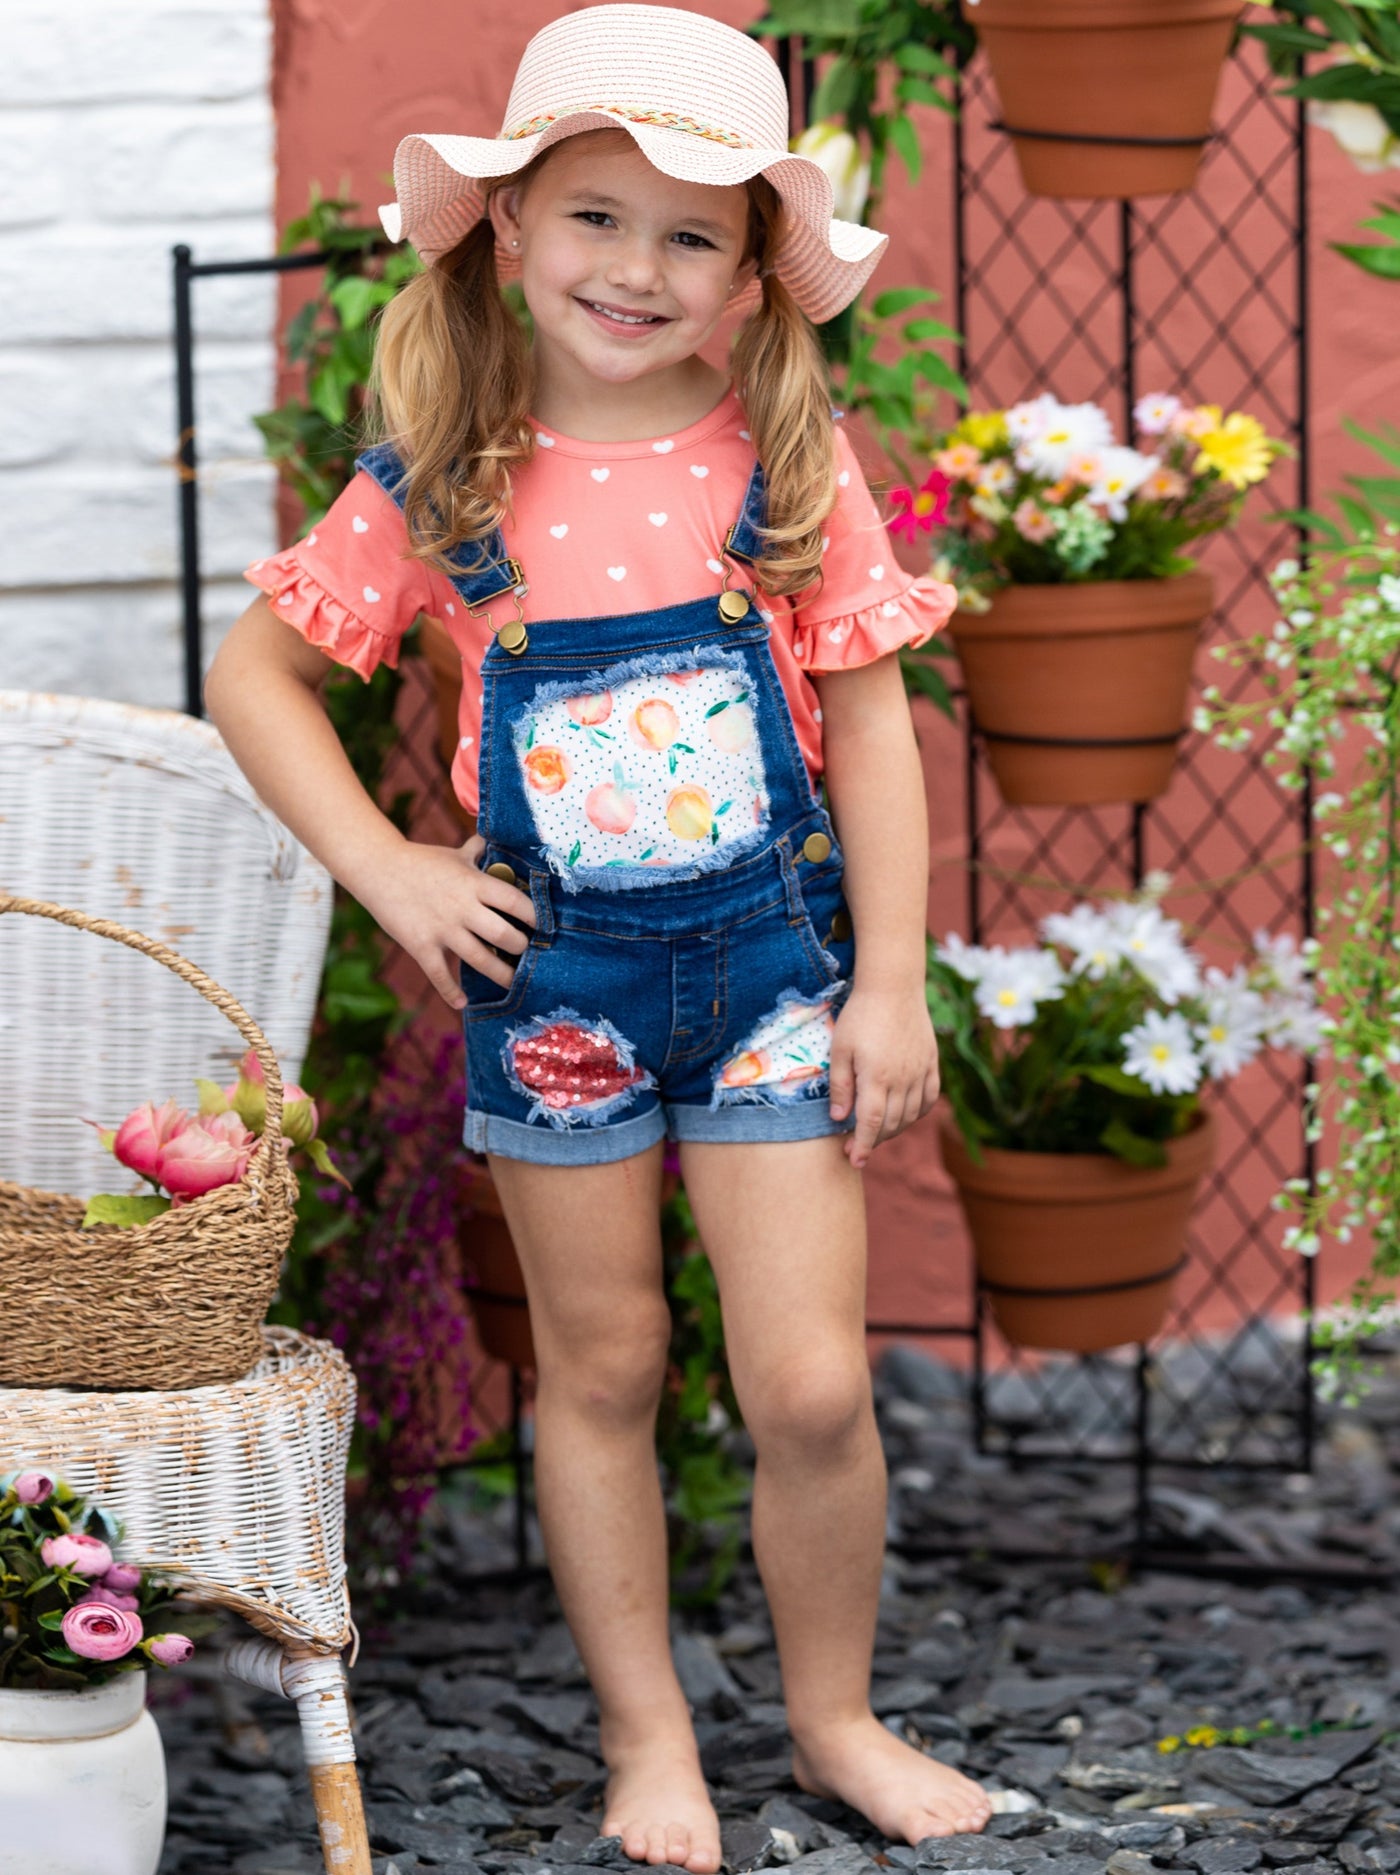 Spring Clothes | Girls Polka Dot Heart Top & Patched Overall Shorts